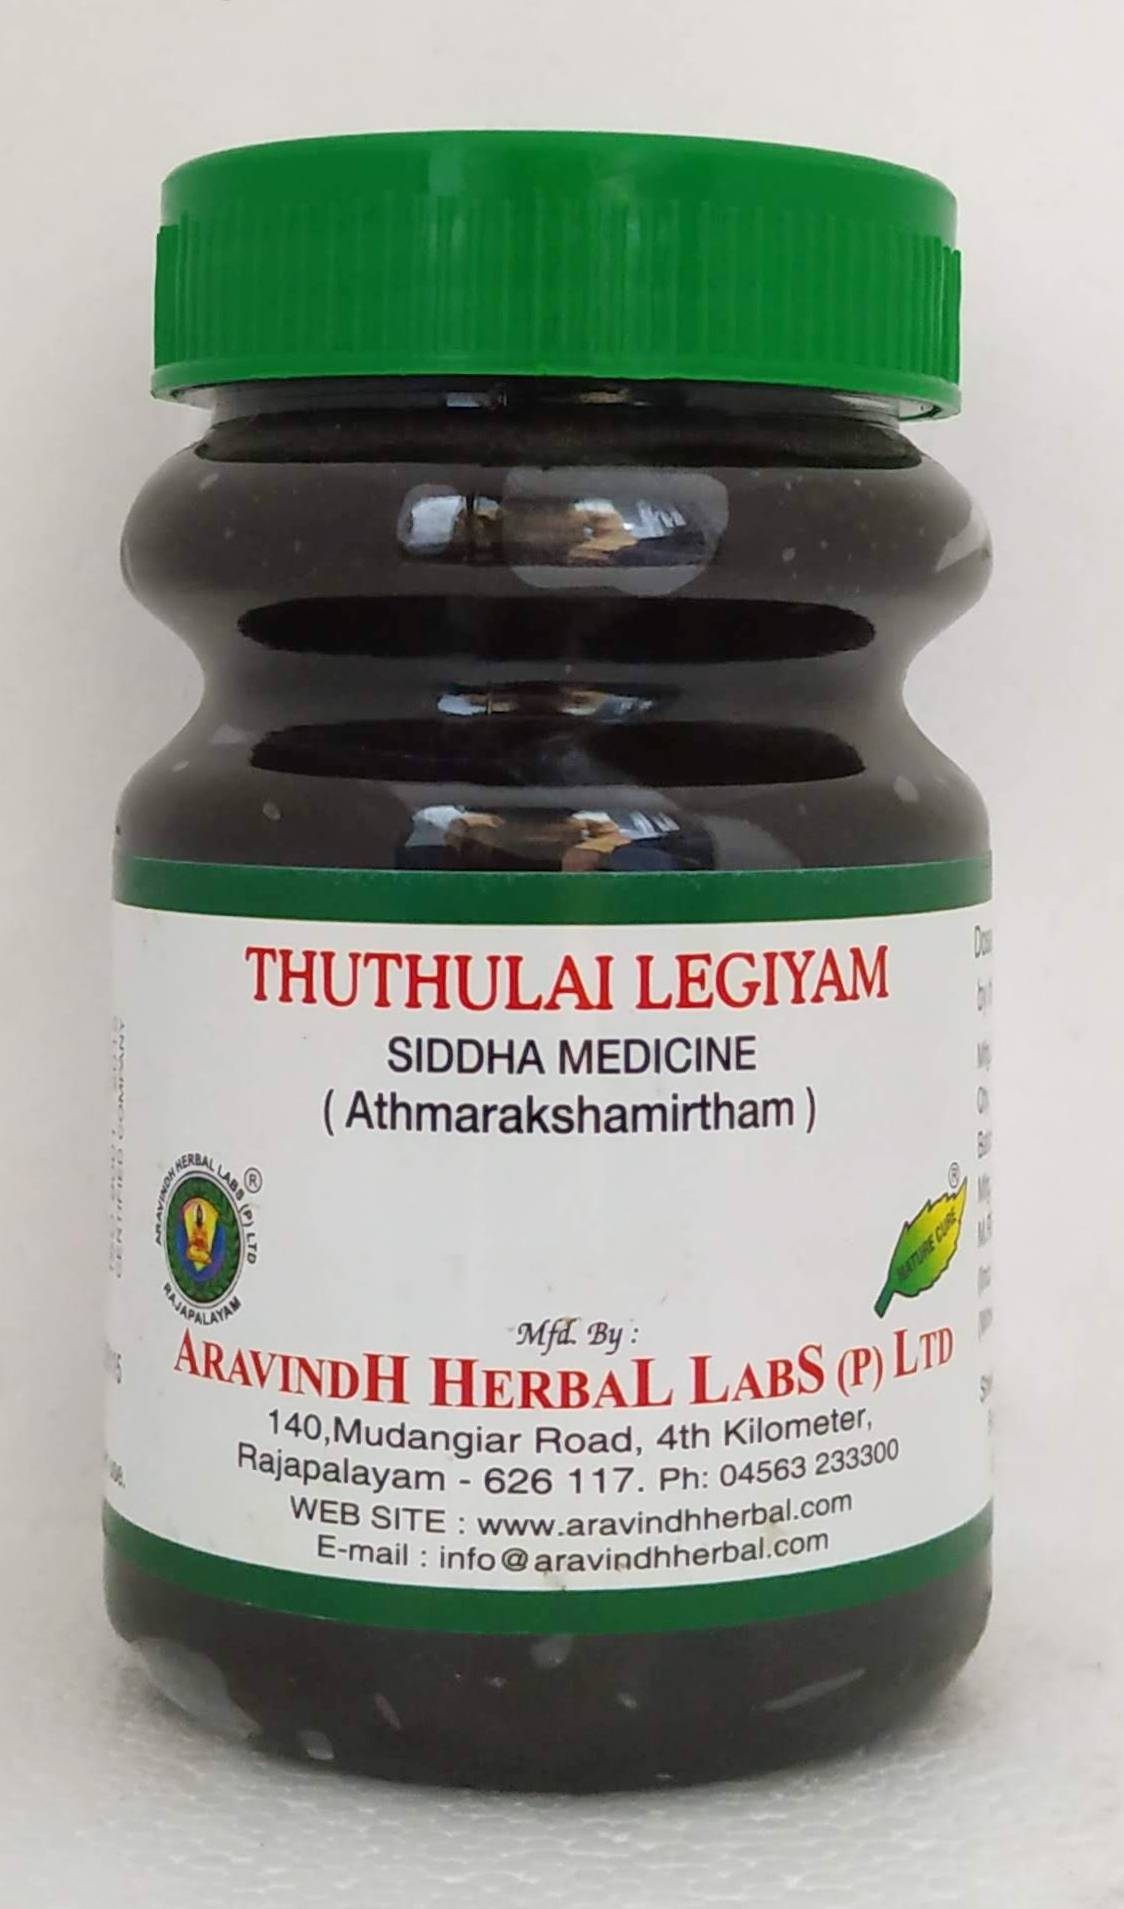 Shop Thuthuvalai Lehyam 250gm at price 215.00 from Aravindh Online - Ayush Care